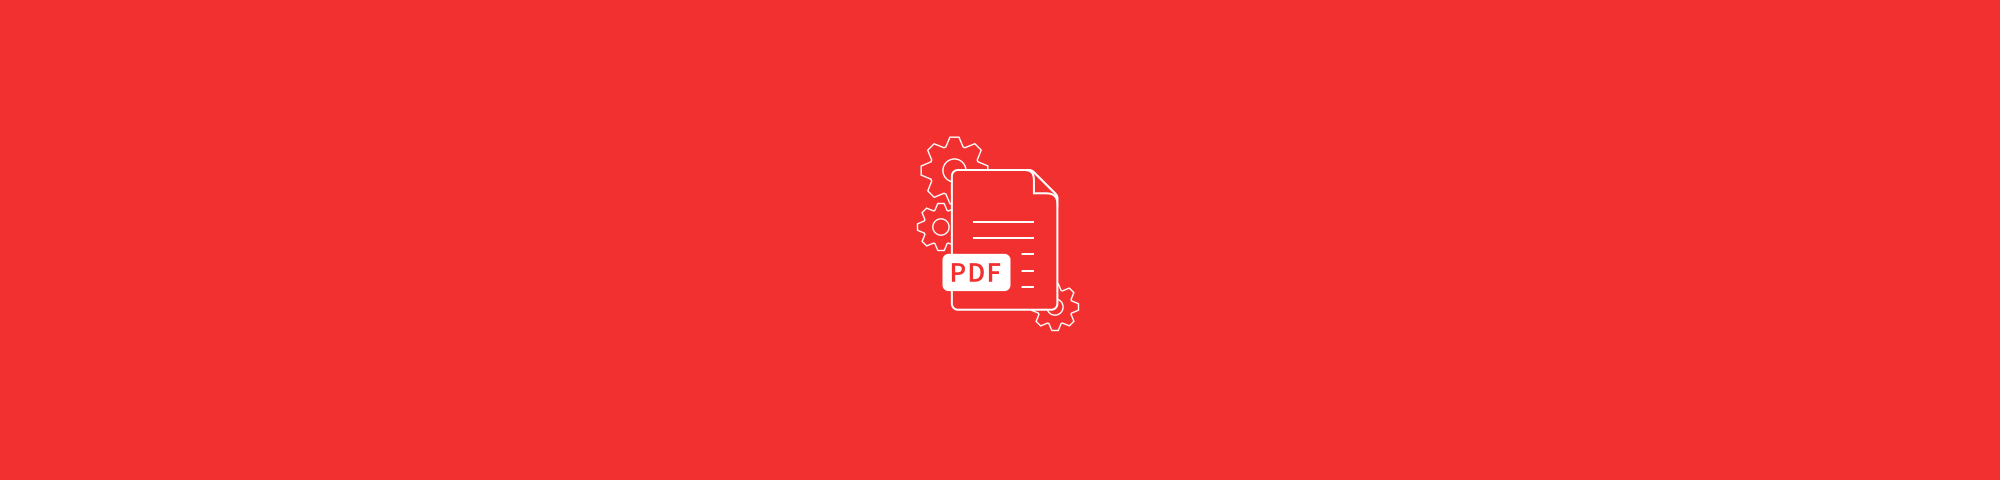 how-to-secure-a-pdf-file-for-free